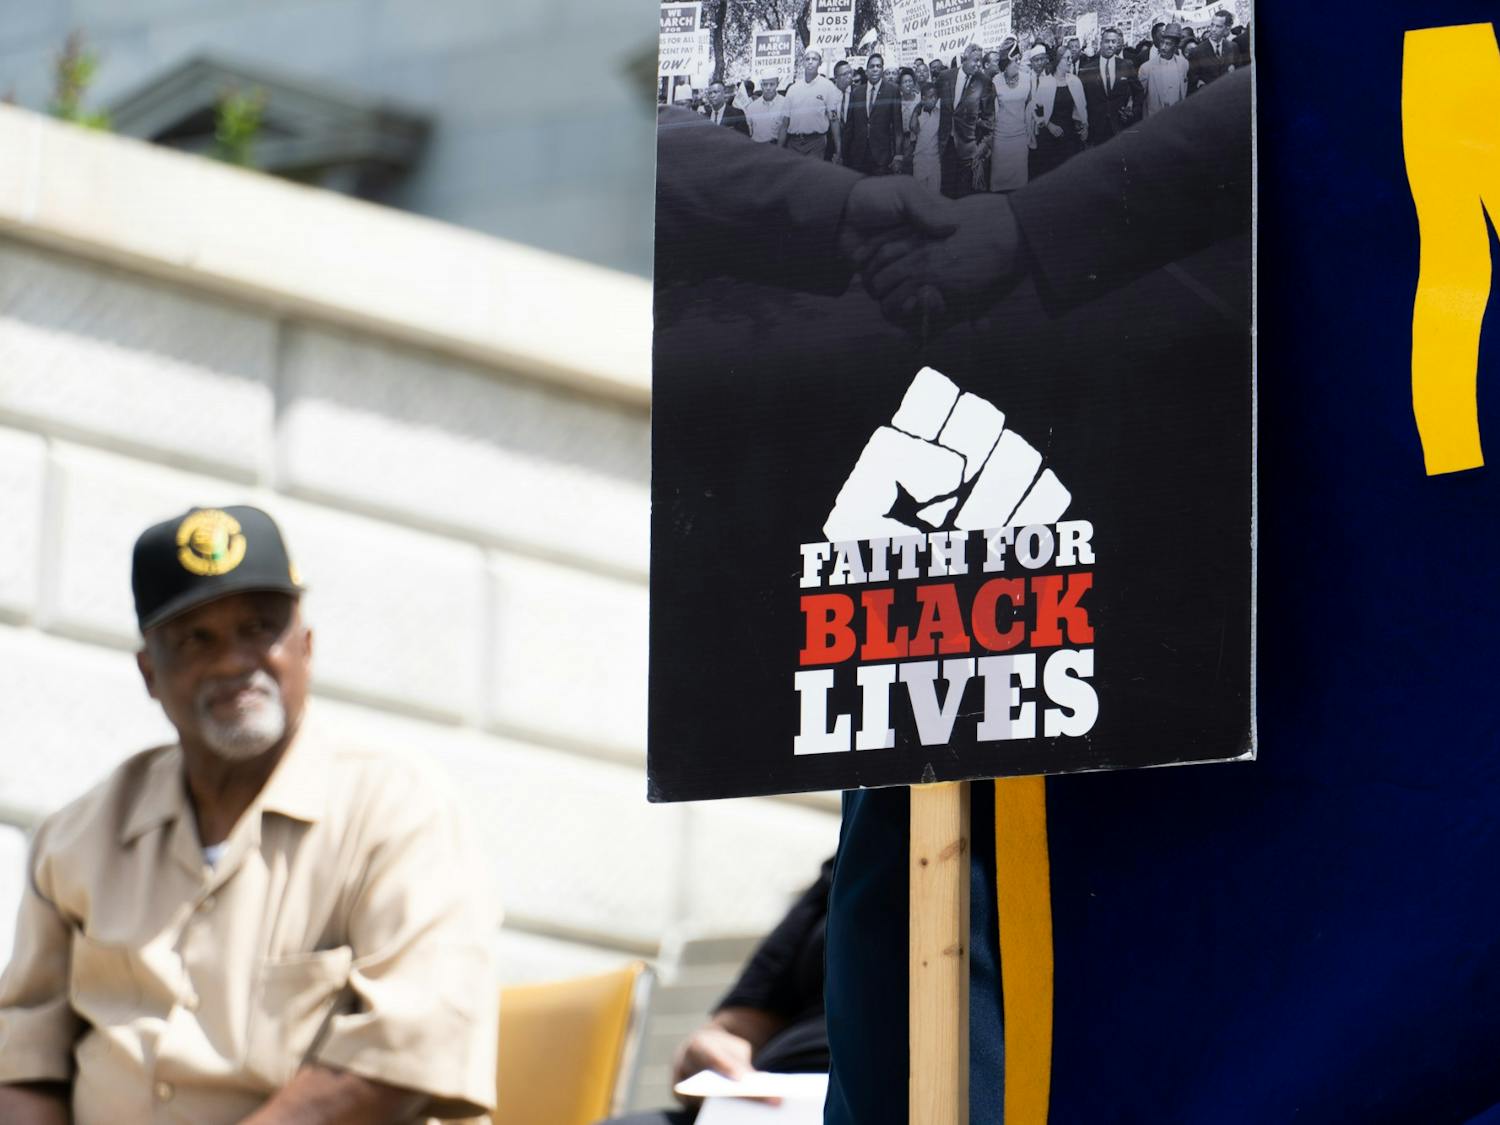 "A lot of folks are here today talking about the need to progress as a society and not regress," said Kambrell Garvin, democratic member SC House of Representative district 77. The South Carolina State Conference of the NAACP held a rally on April 23, 2022, to denounce the death penalty.